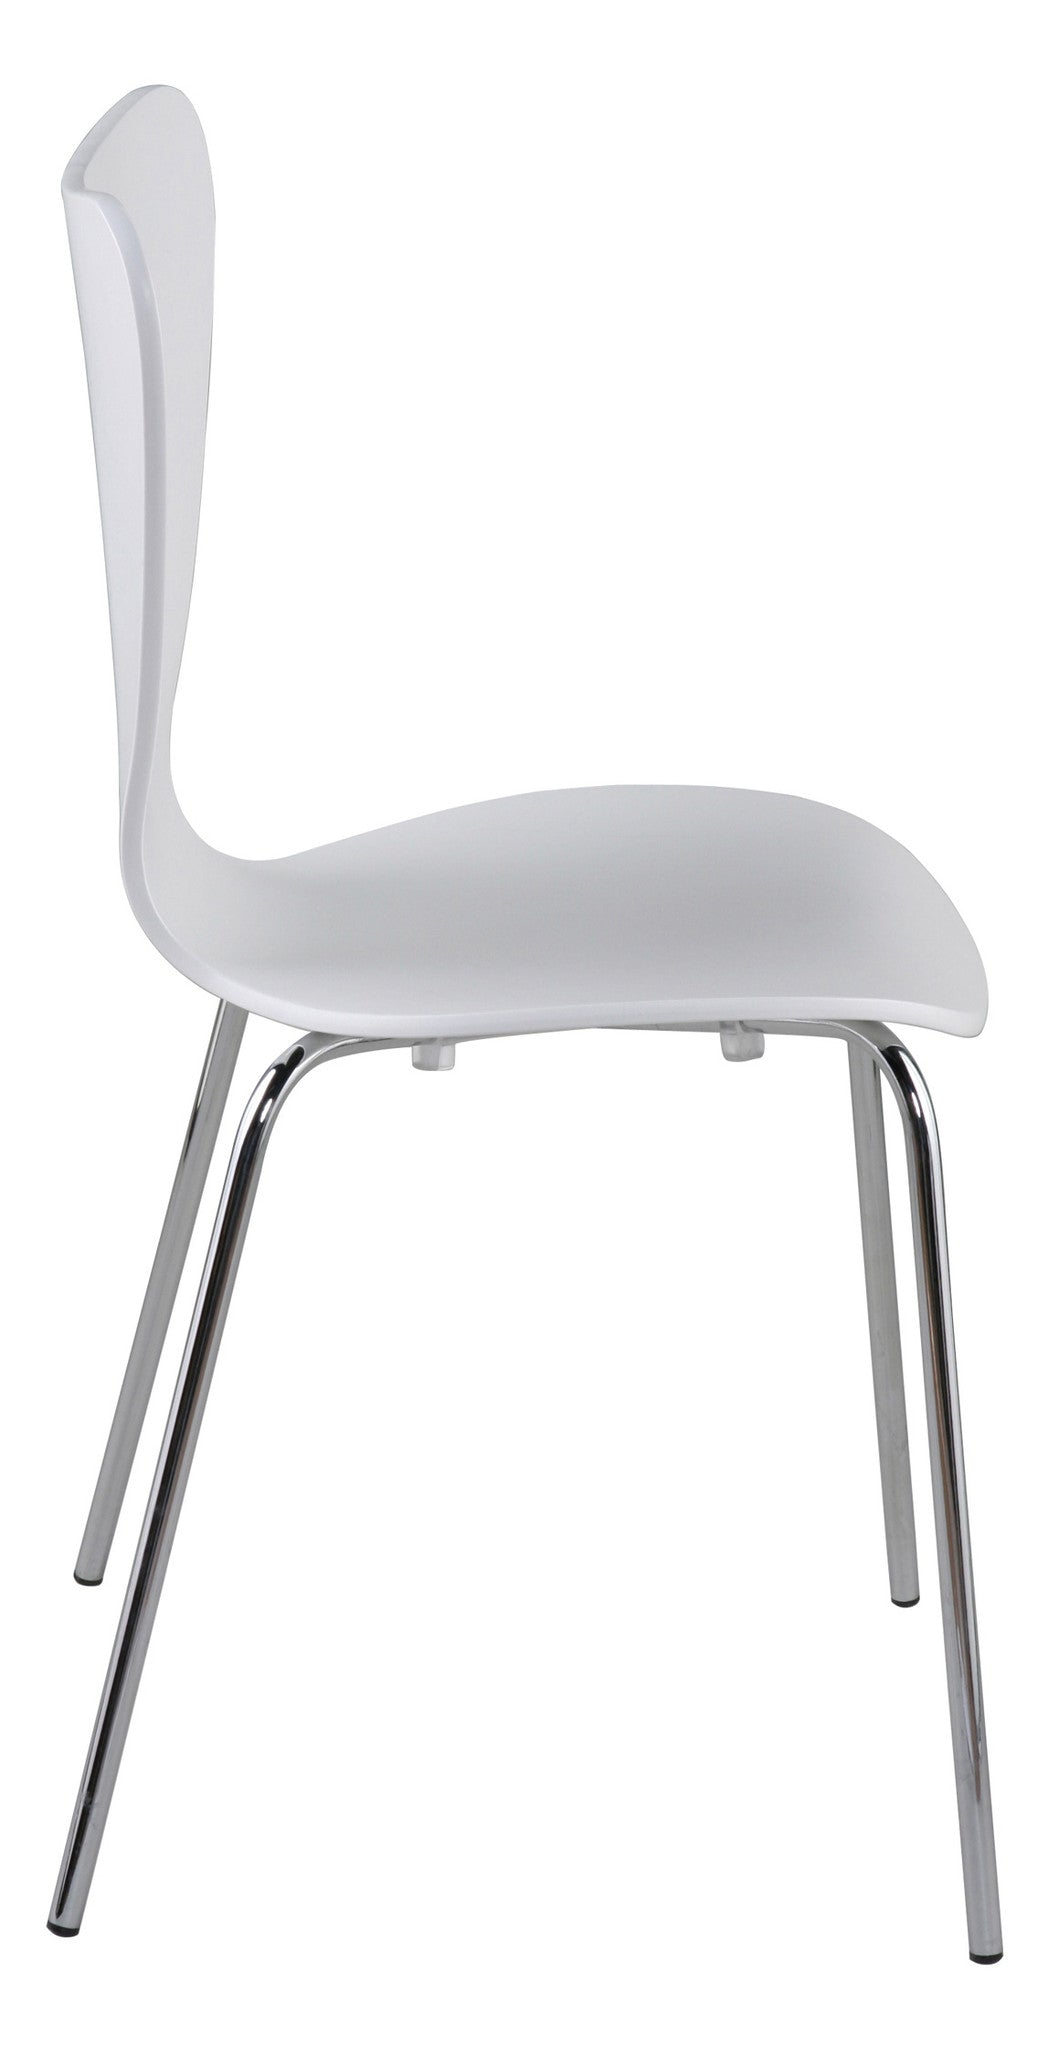 Tenney Side Chair White (Set of 4)